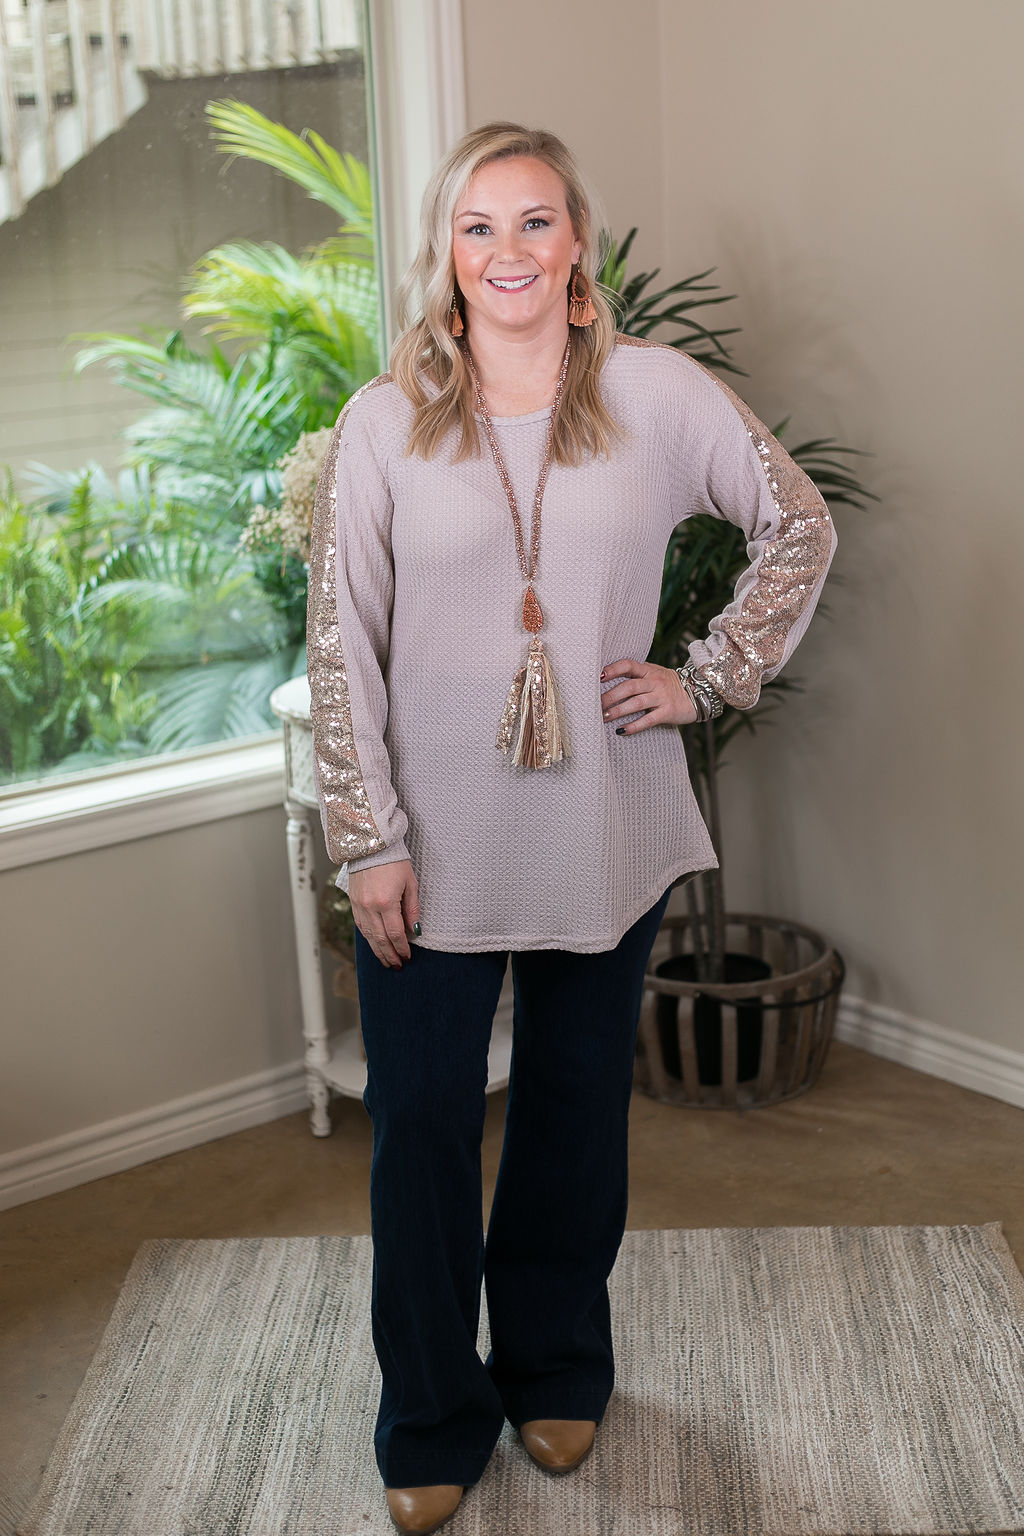 Find Your Happiness Knit Long Sleeve Top with Rose Gold Sequin Accents in Beige Ivory - Giddy Up Glamour Boutique